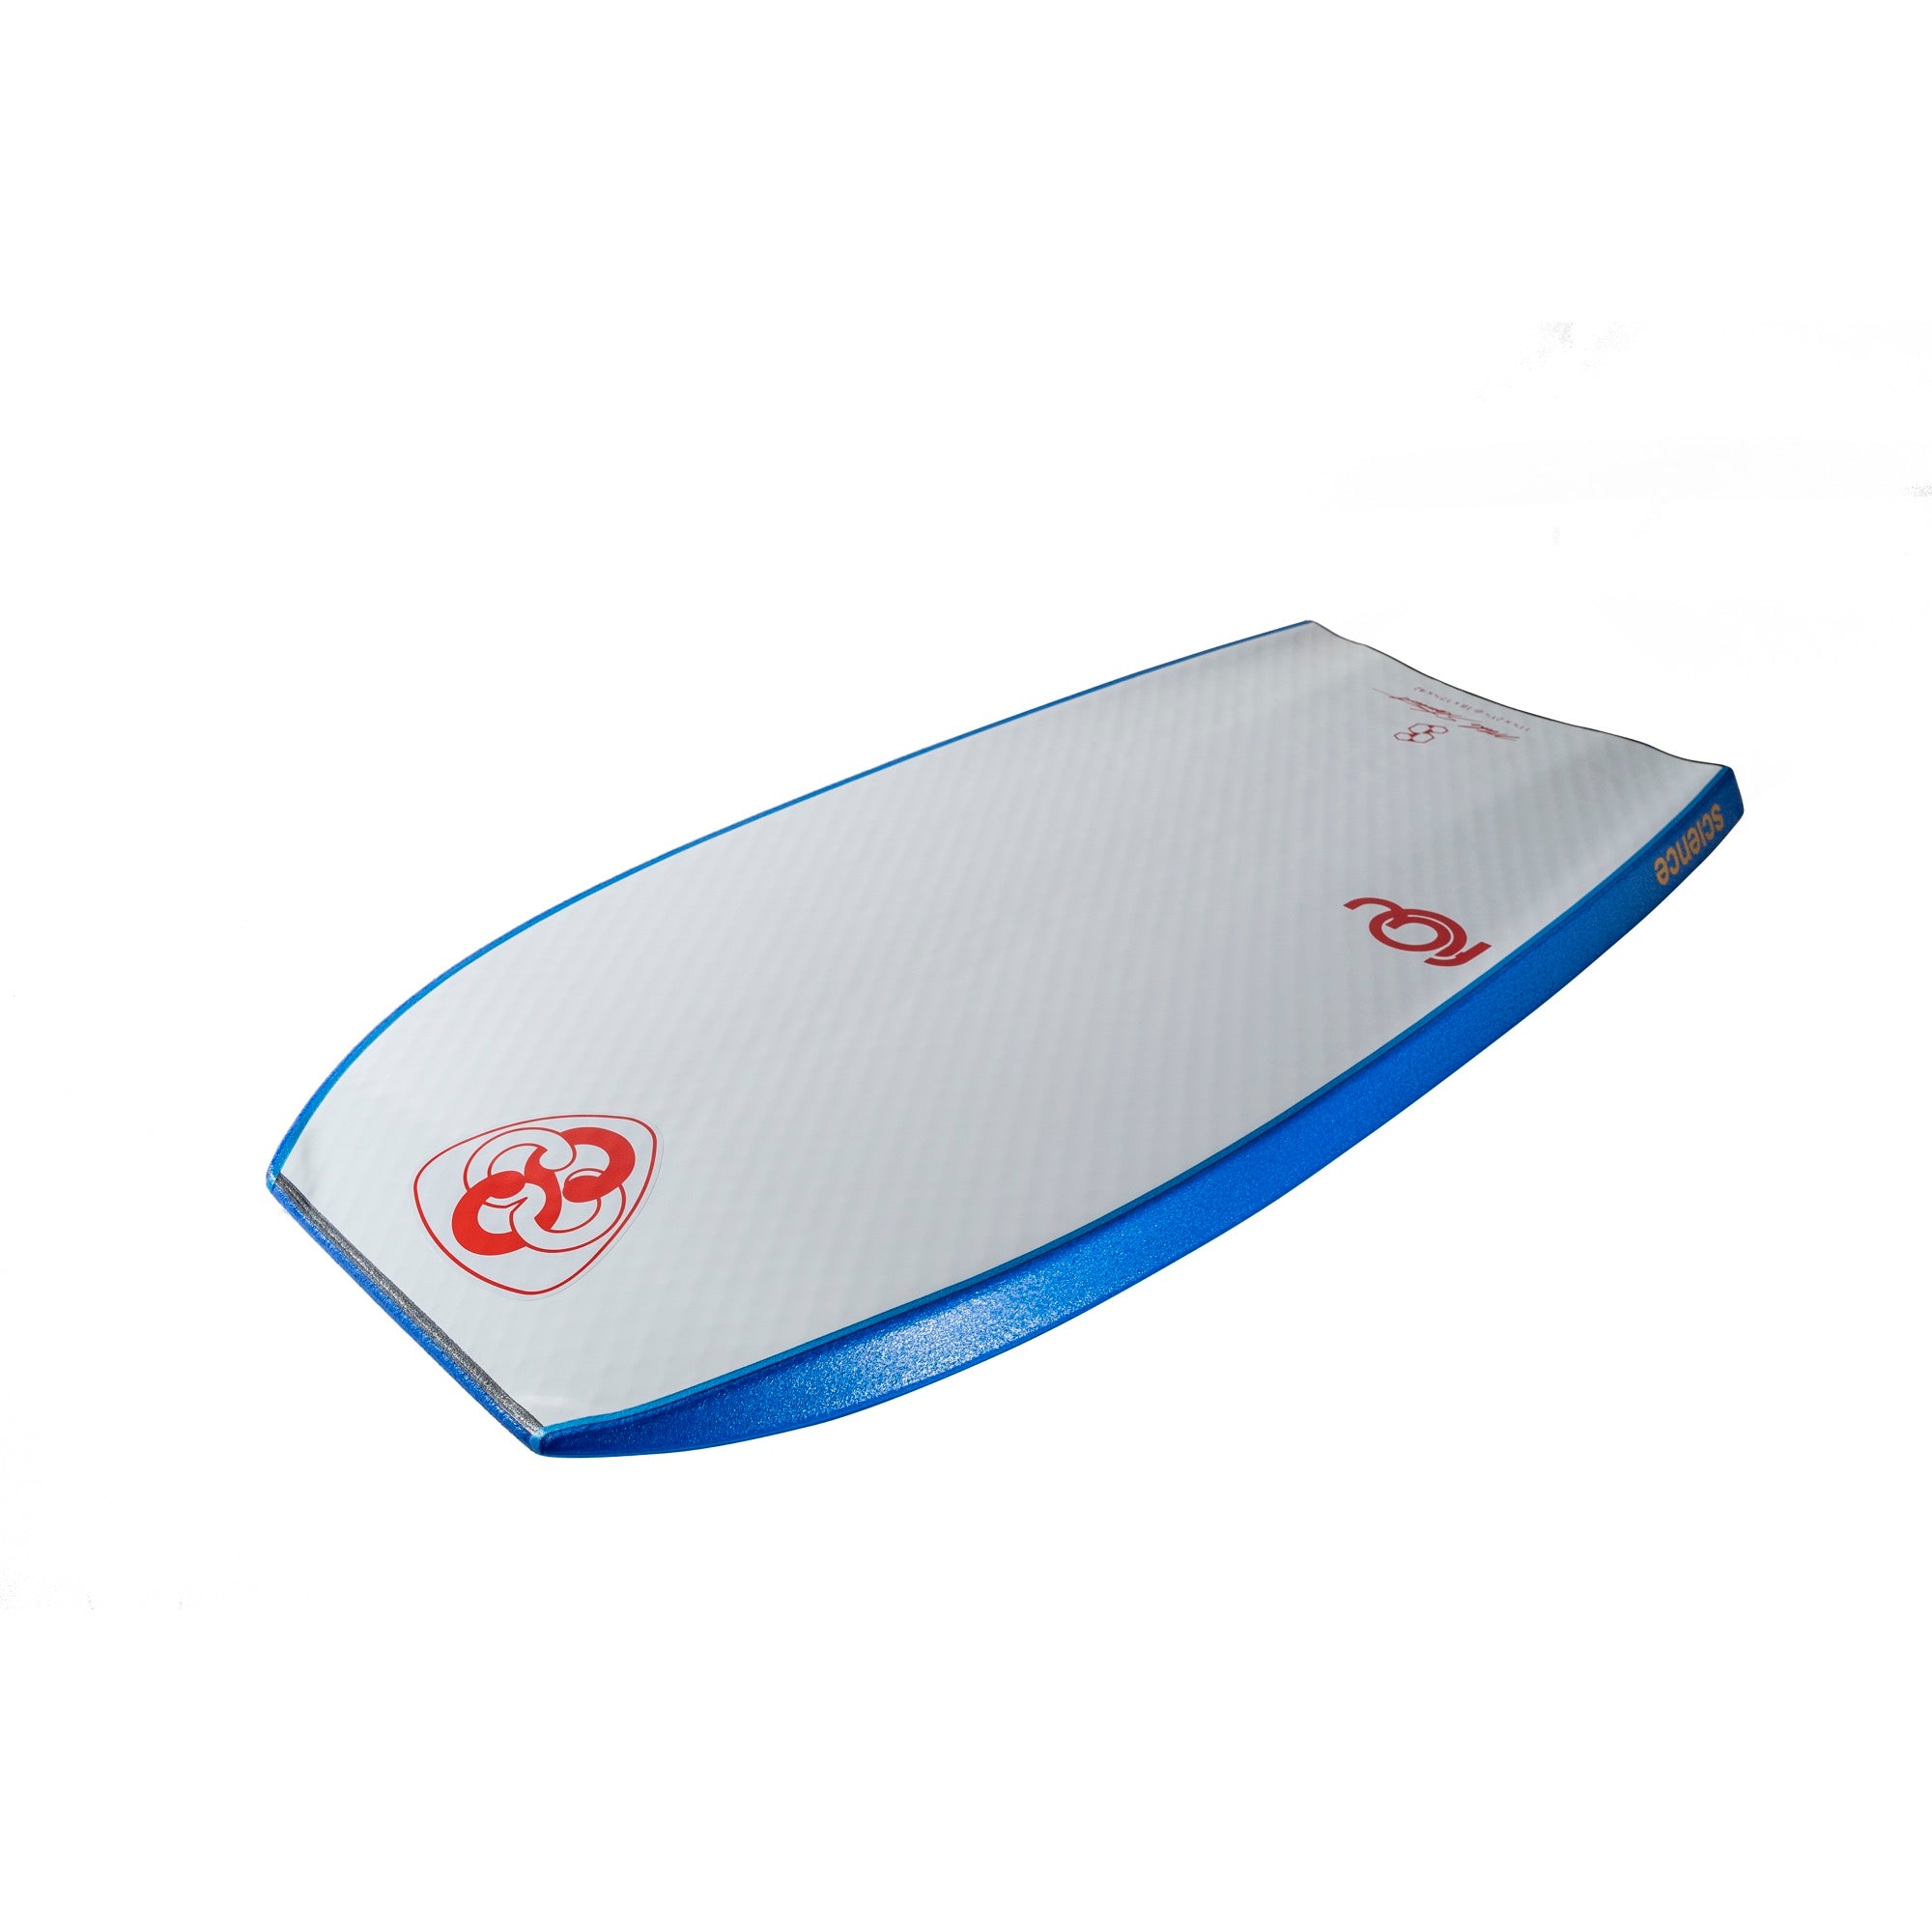 Science Bodyboards - MS FLOW PP 1.5 - Blue / White